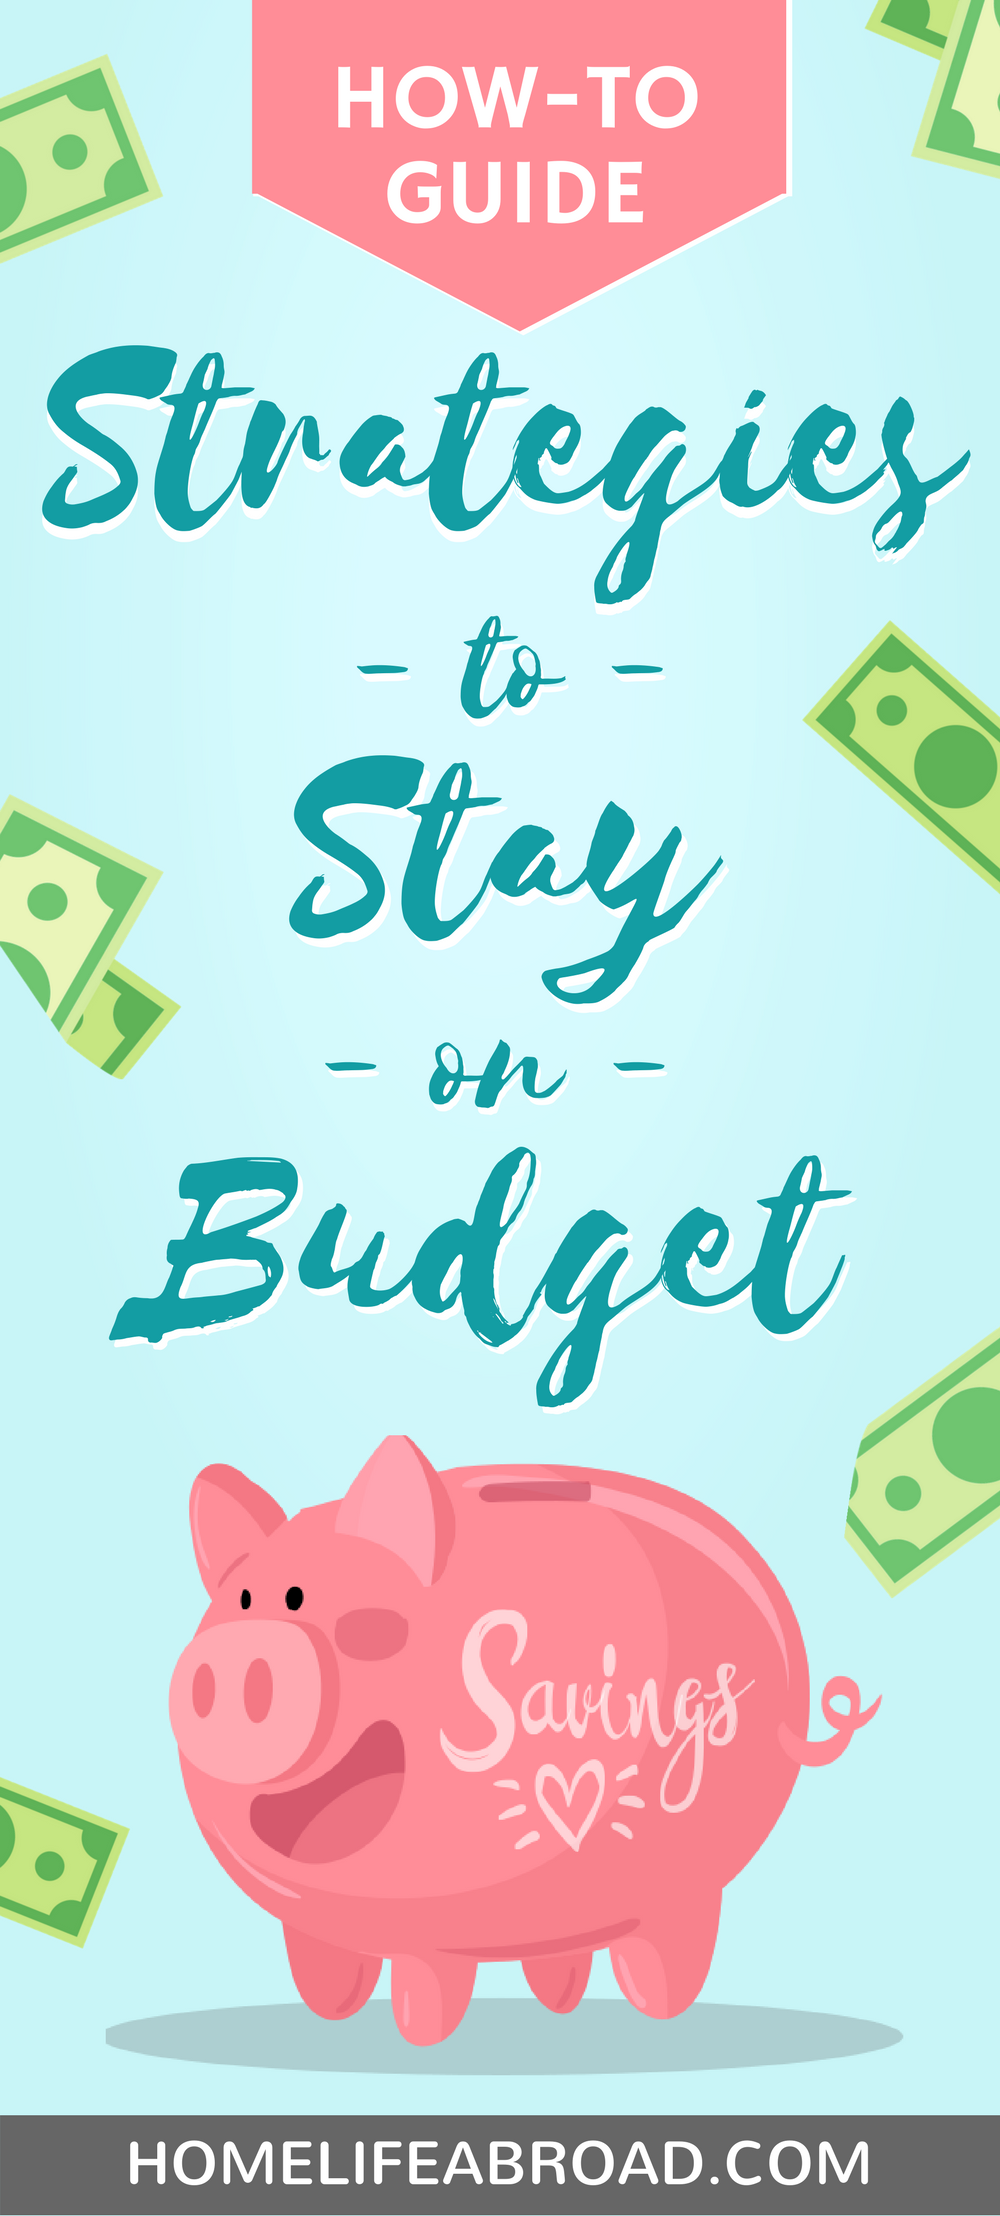 How do you keep yourself on budget? Here are 5 steps to swear by that can save thousands! #budgeting #budget #money #spreadsheet #free #personalfinance #finance